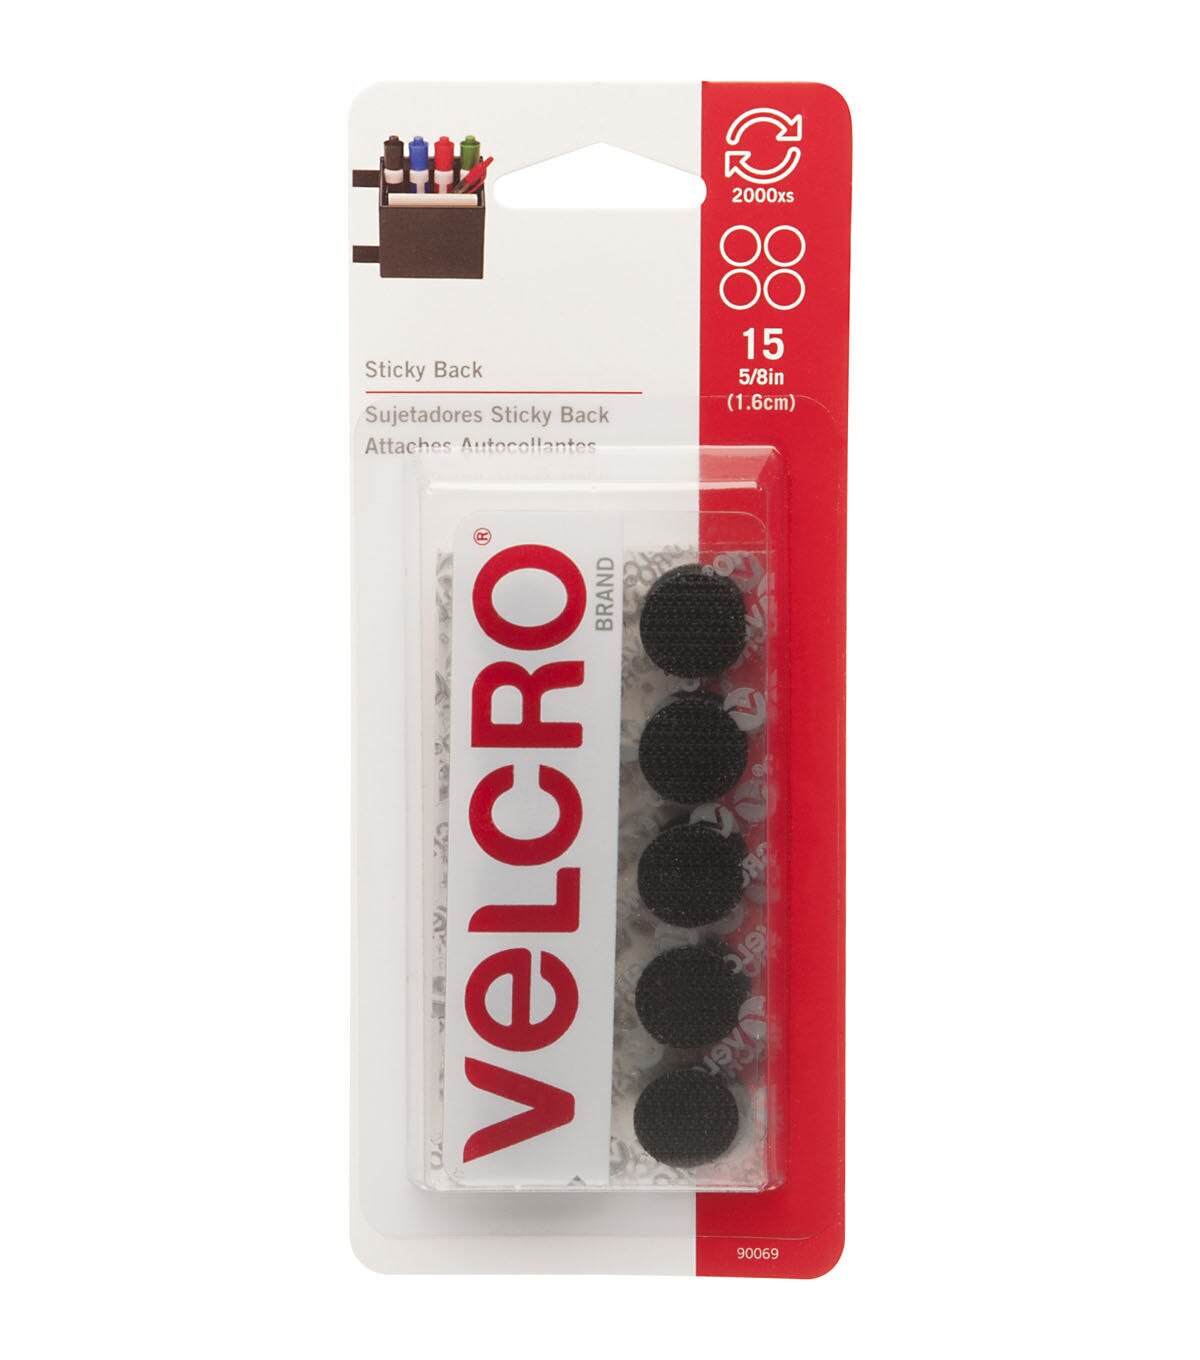 VELCRO BRAND Sticky Back 3/4" Coins 200 Sets White 91824 for sale online 